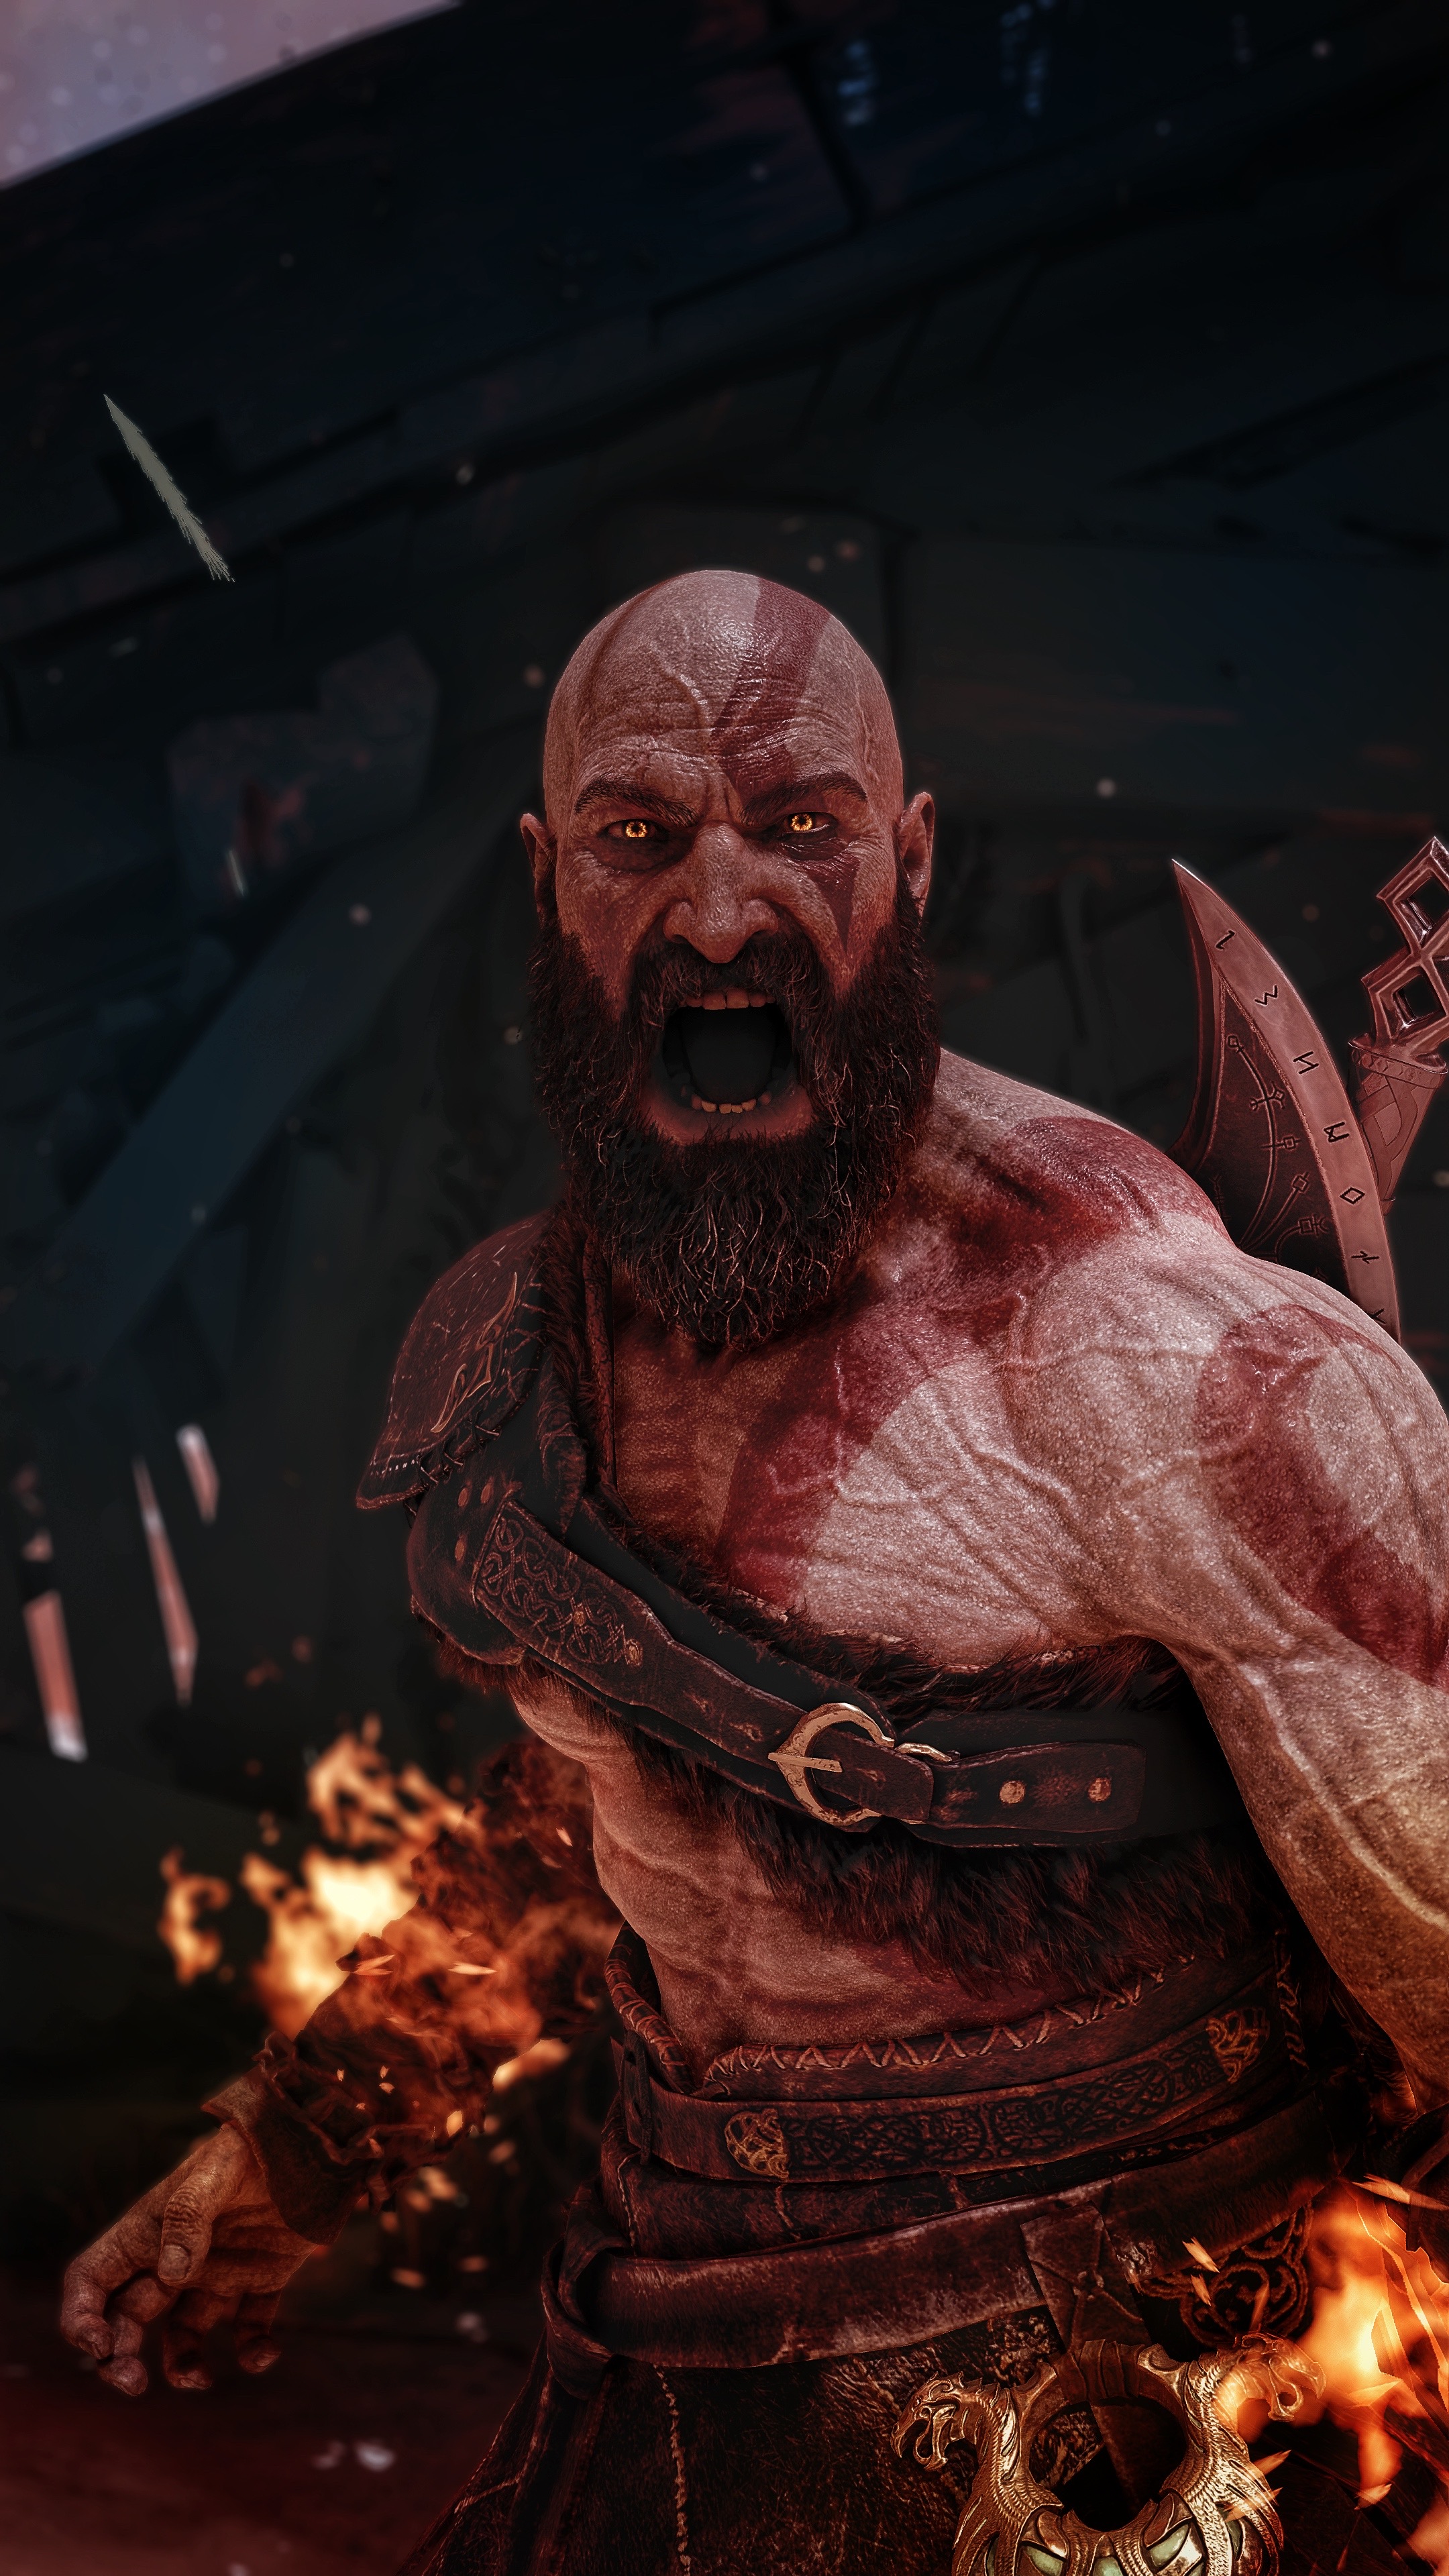 Santa Monica Studio God Of War Ragnarok While This Shot Only Focuses On Kratos Rage Gameonfocus S Work Showcases All Of The Emotions Throughout God Of War 18 While